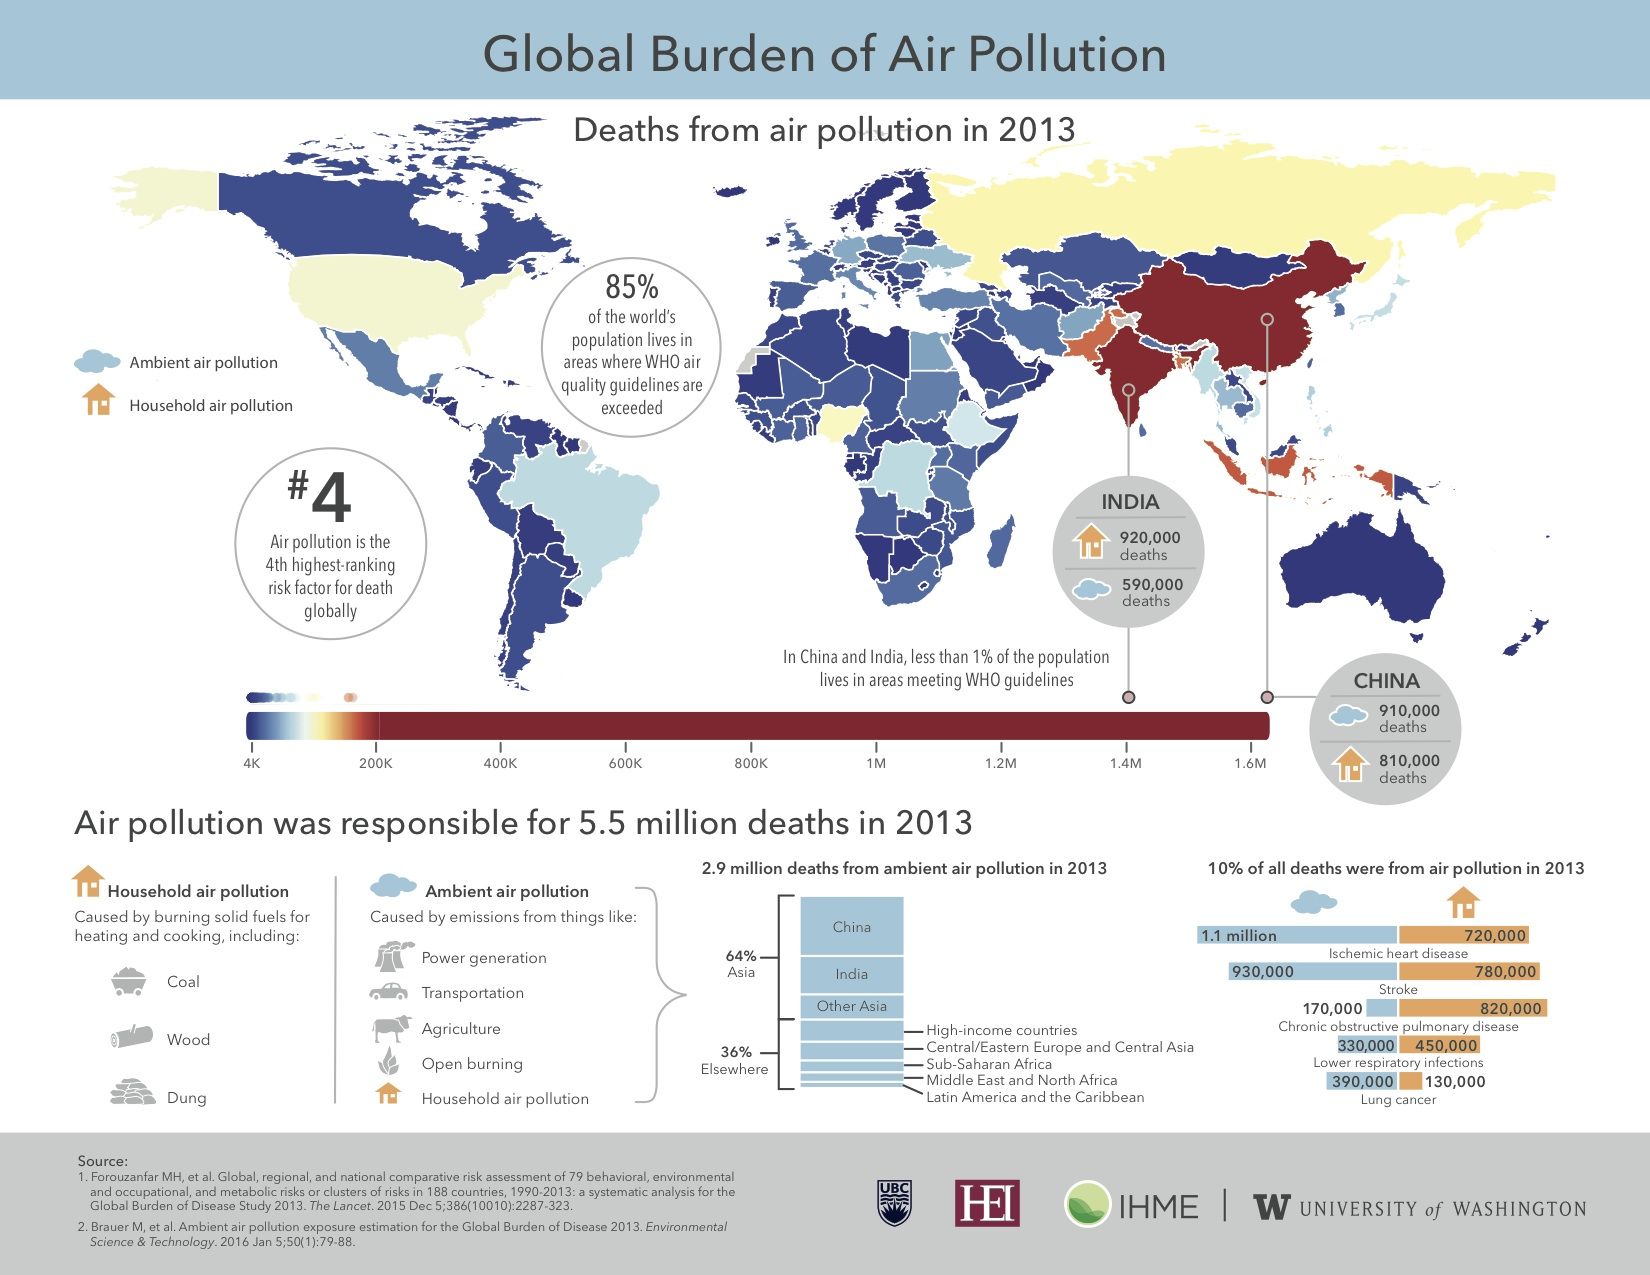 Air Pollution Claims 5.5 Million Lives a Year, Making It the Fourth